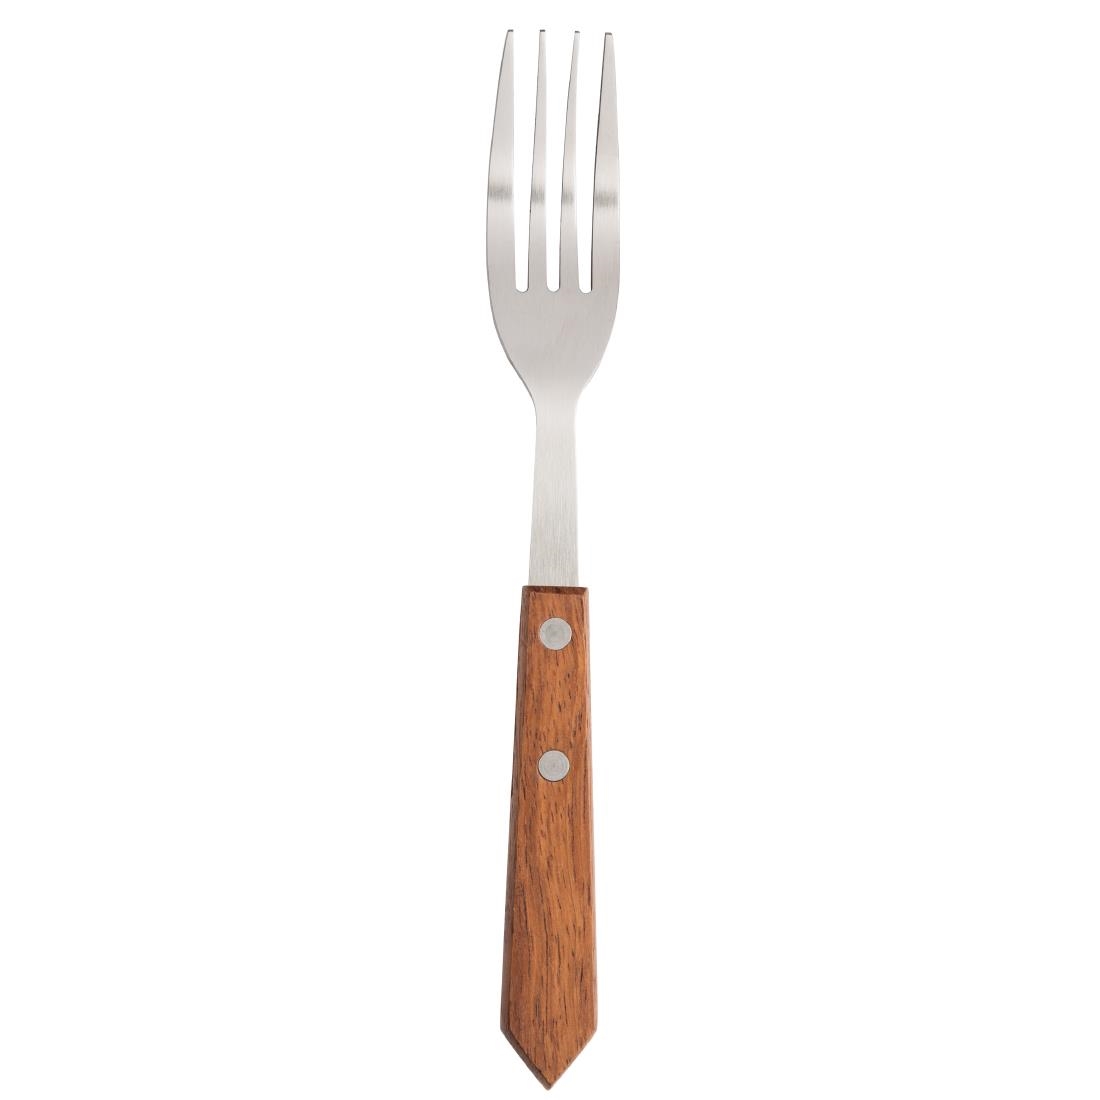 Olympia Steak Forks Wooden Handle